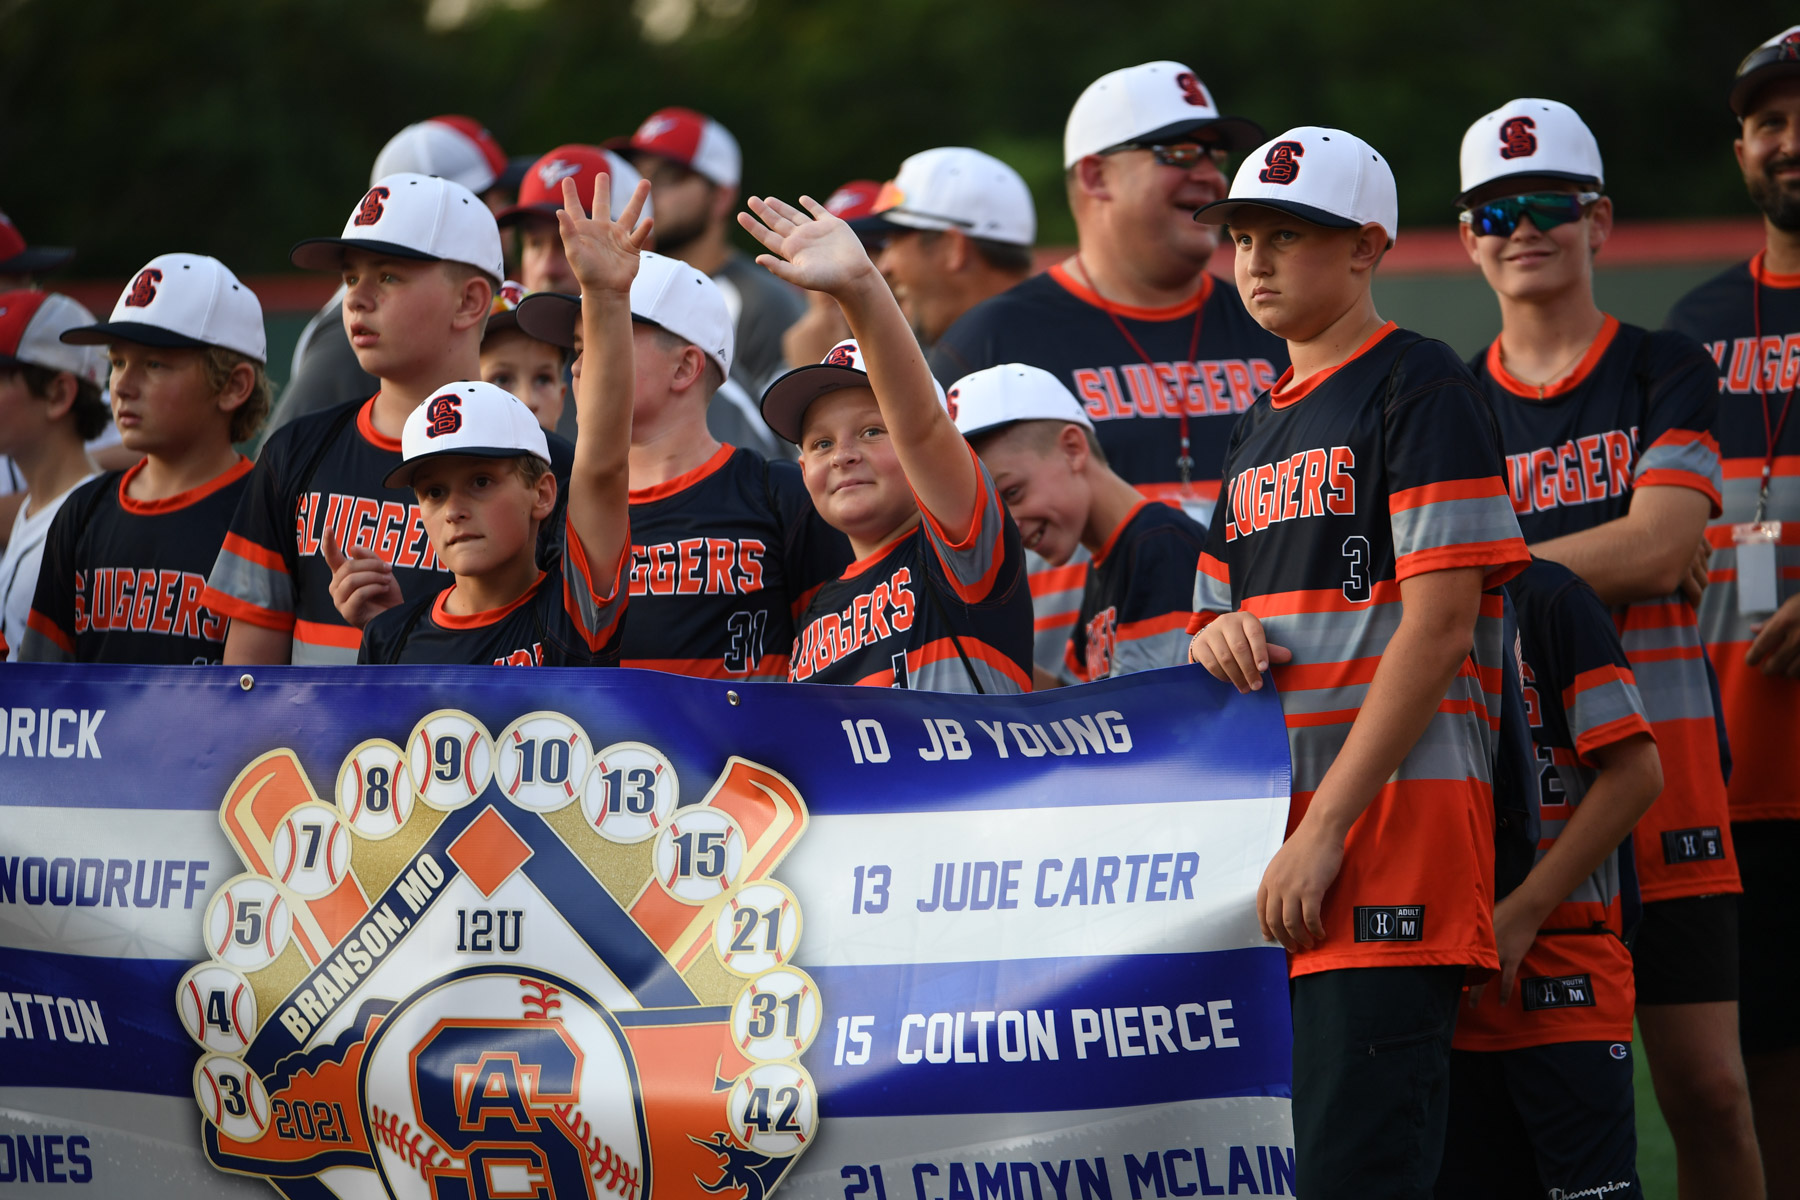 A youth baseball team in black and orange uniforms stand together holding a banner in front of them.